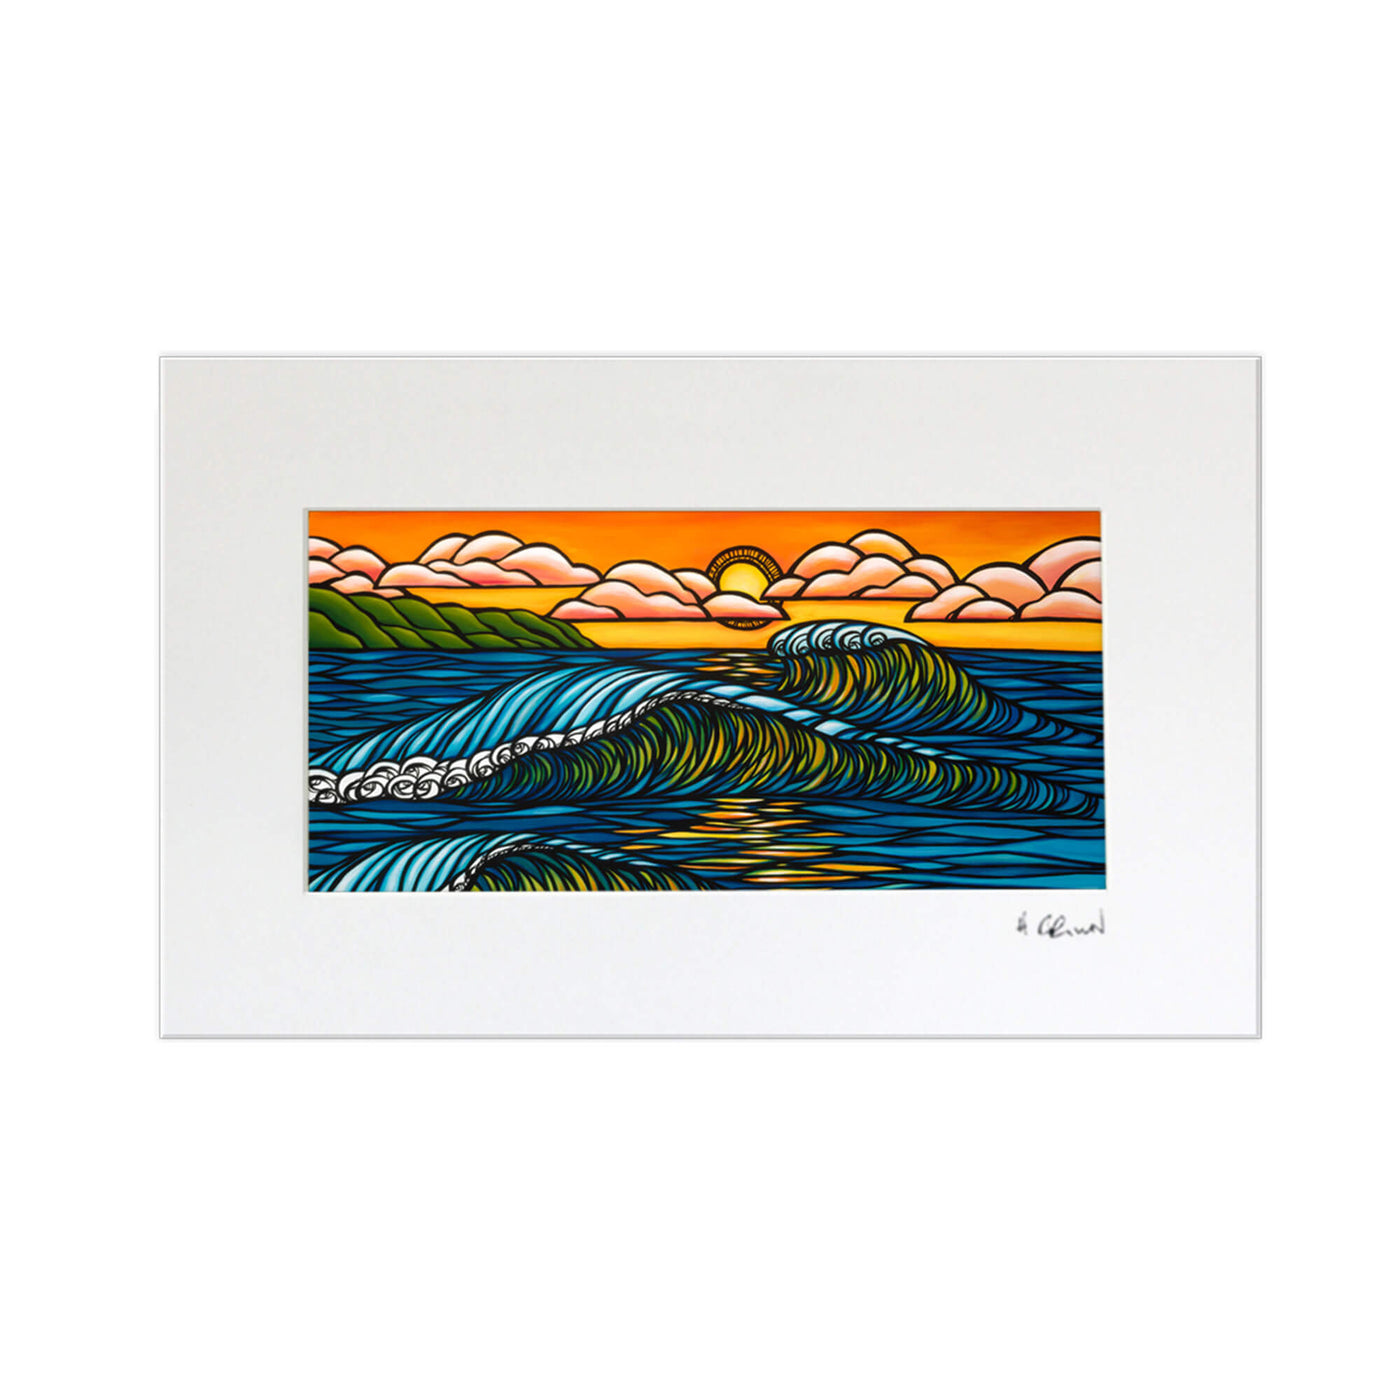 A matted art print featuring the sun sinking below the horizon at Haleiwa harbor, illuminating the rolling waves by Hawaii surf artist Heather Brown